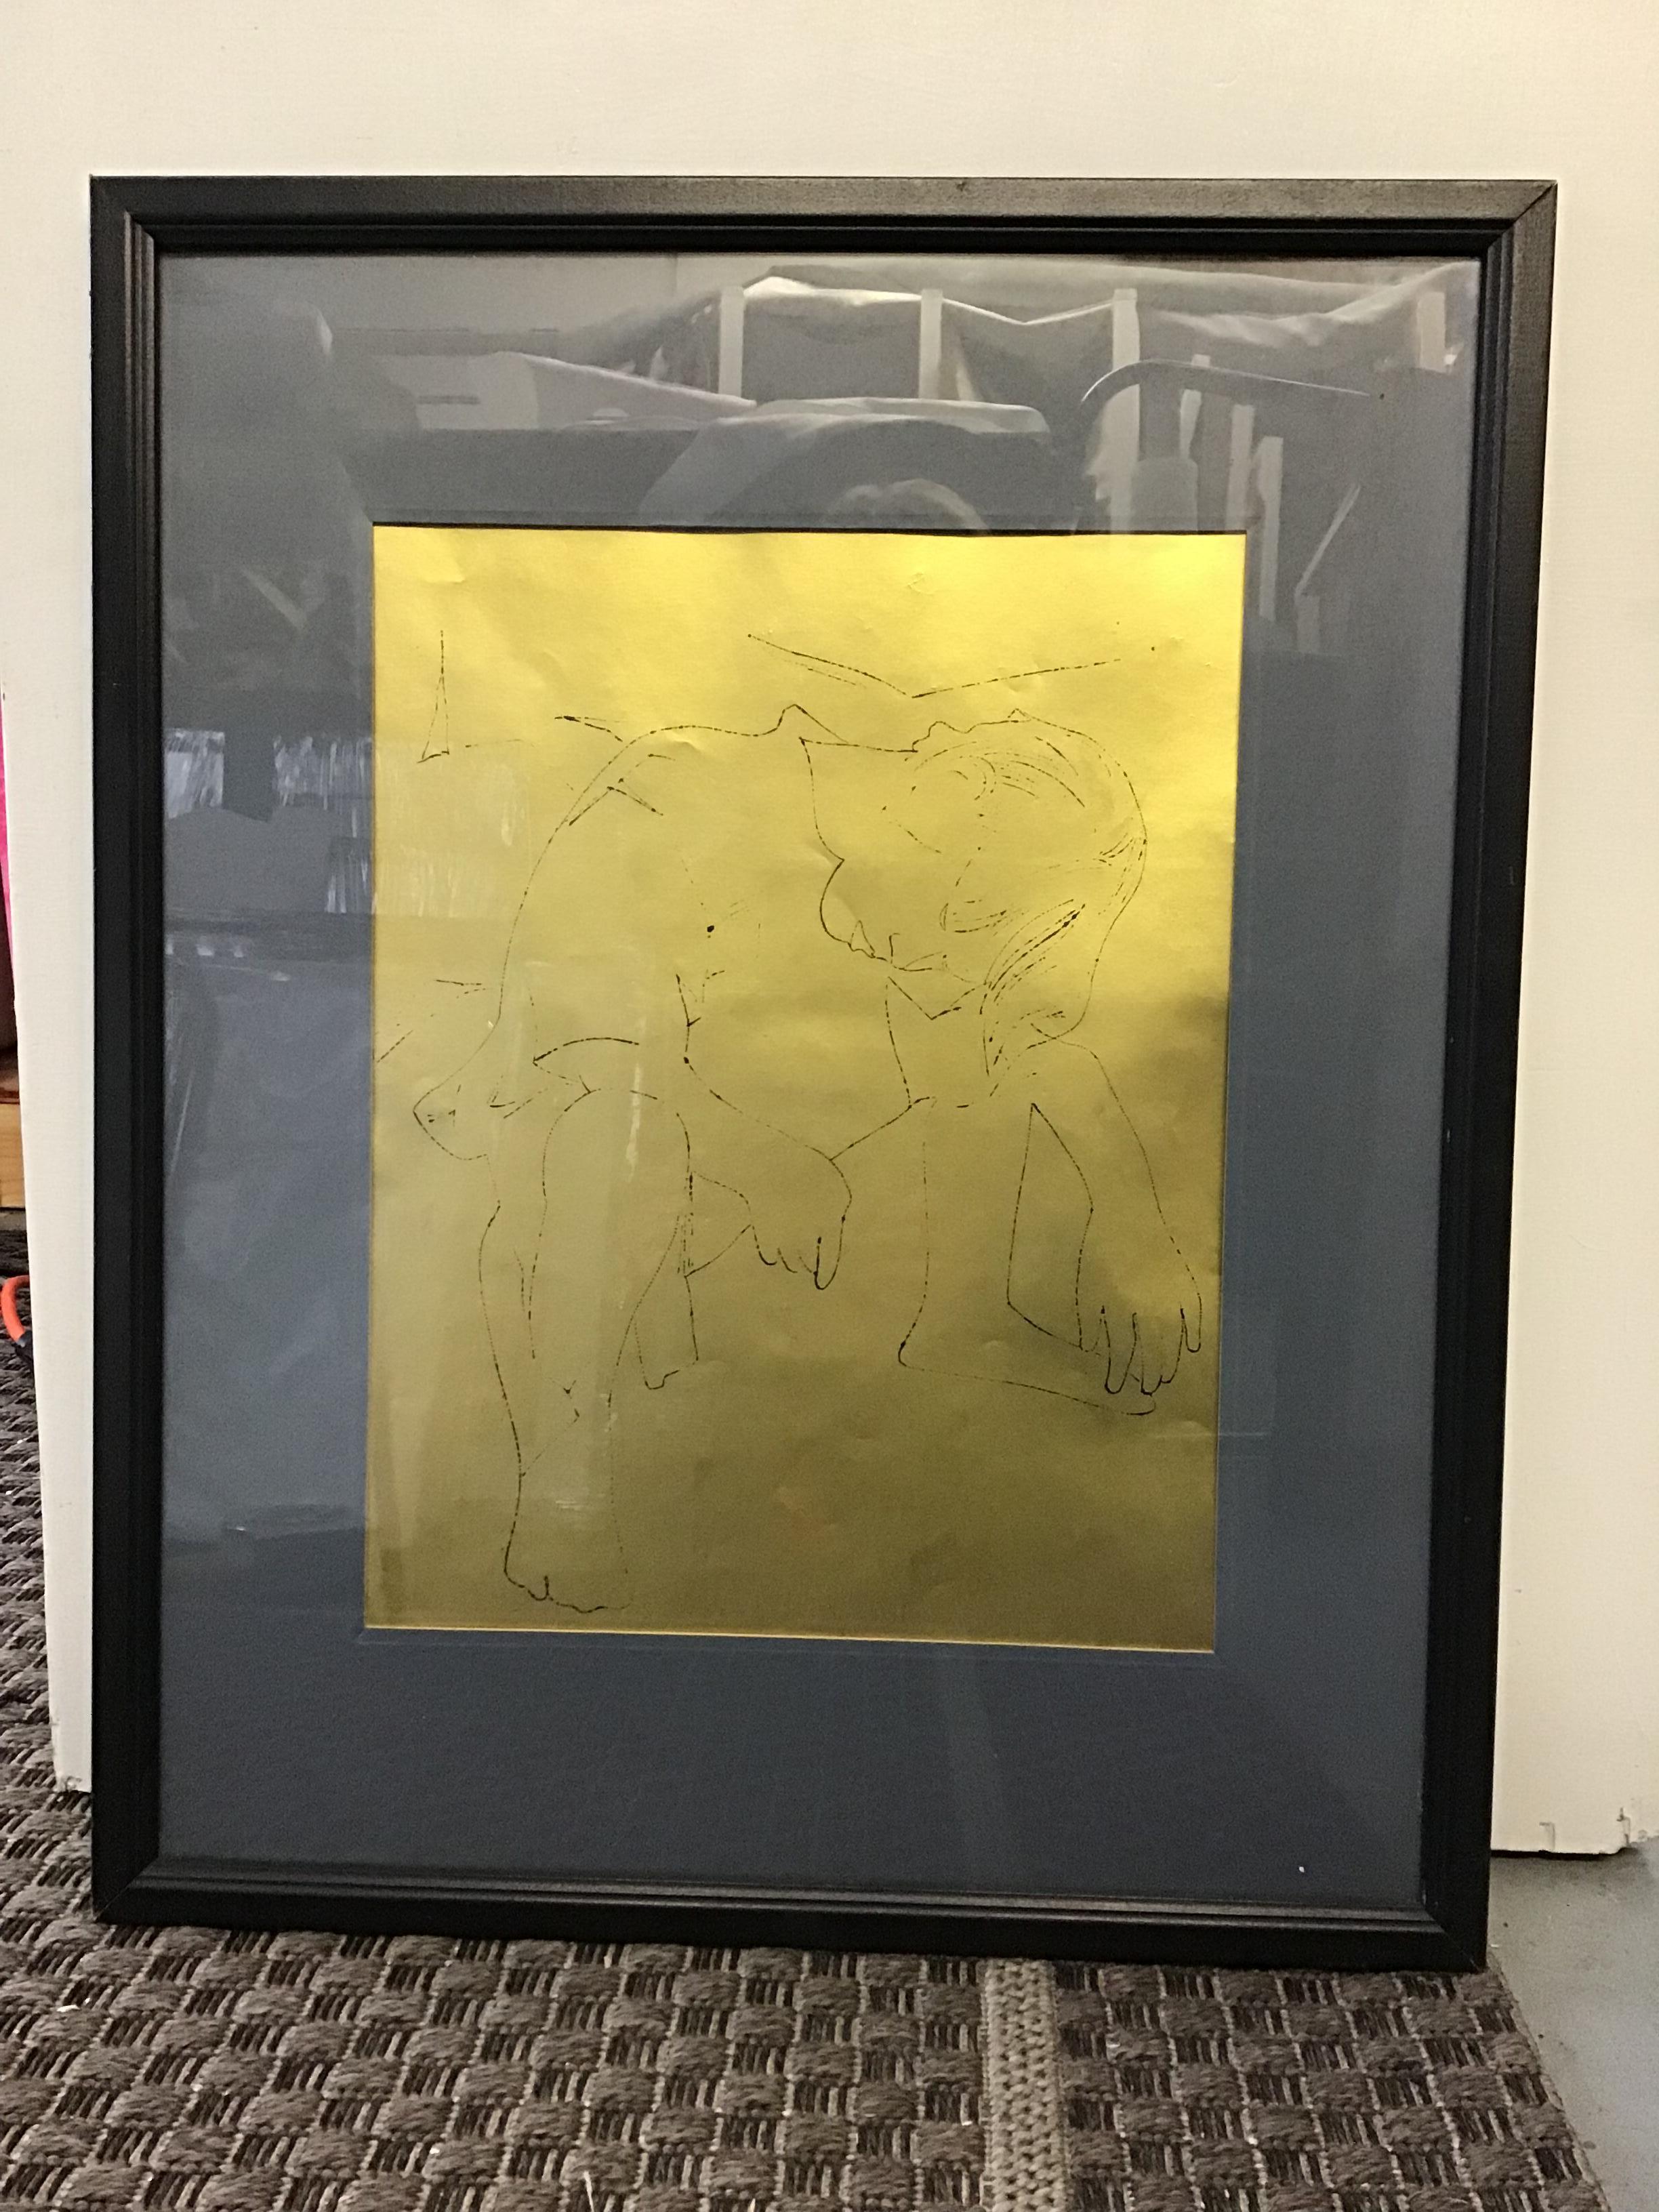 Andy Warhol Figurative Print - One plate from "A Gold Book"